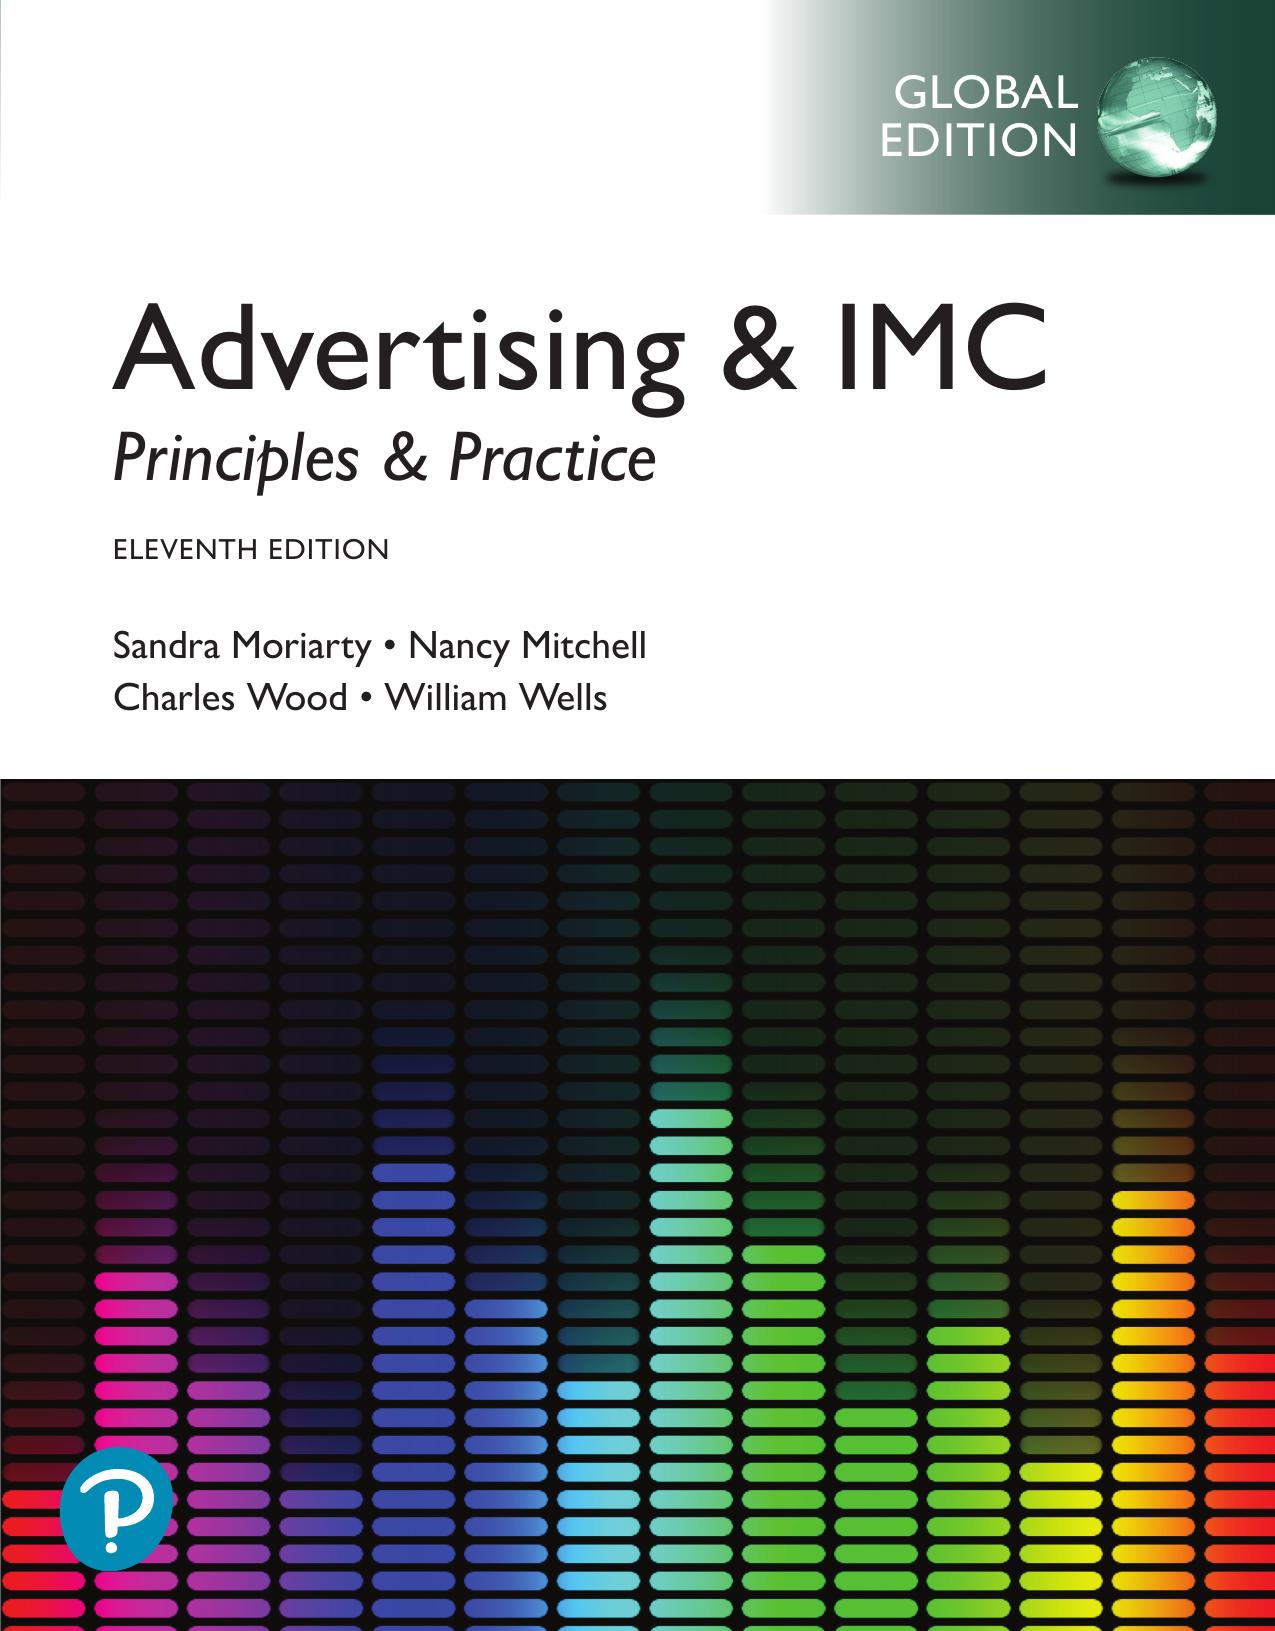  Test bank for Advertising  and  IMC Principles and Practice, eBook, Global 11th ESandra Moriarty  and  Nancy Mitchell  and  Charles Wood  and  William Wells by  Sandra Moriarty / Nancy Mitchell / William D. Wells / Charles Wood 